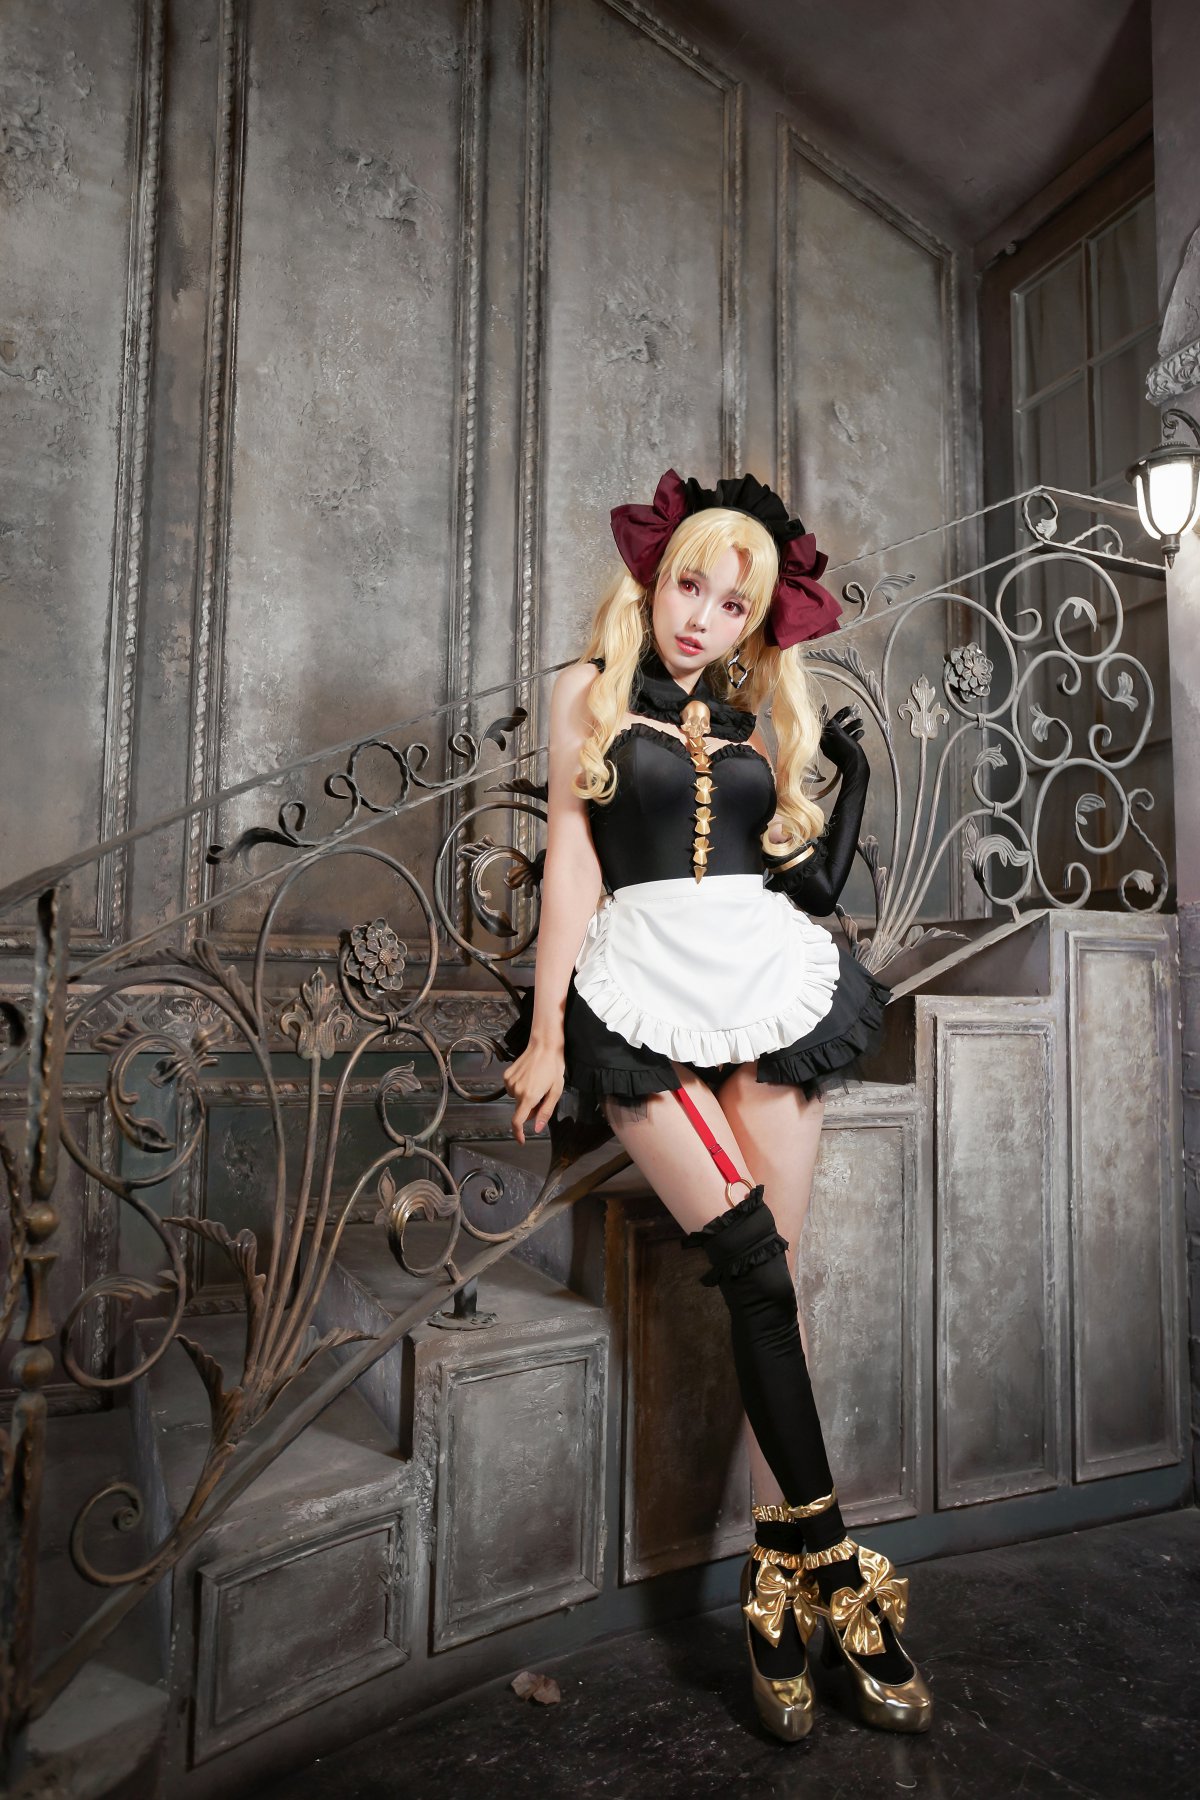 Coser@Ely Vol.022 ERE エレシュキガル 写真 A 0075